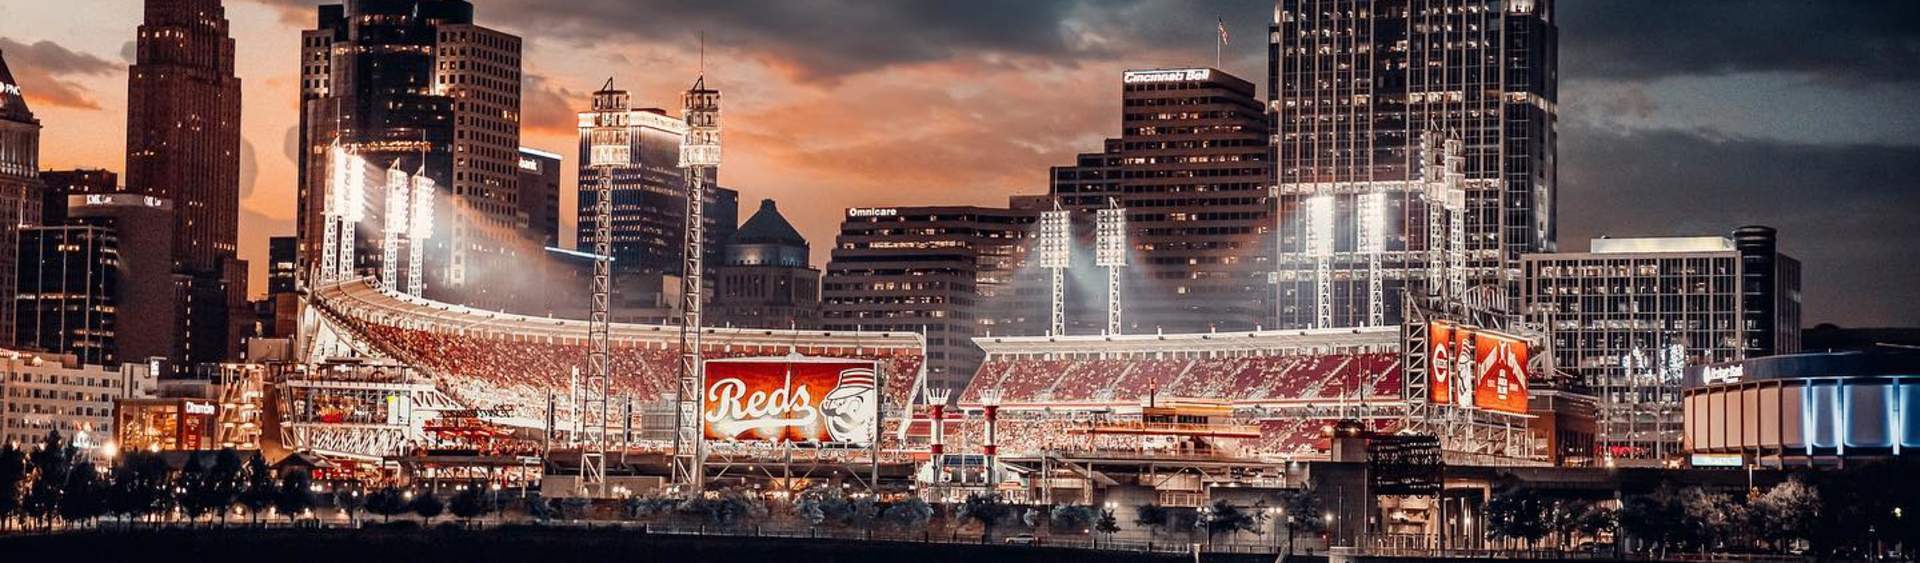 Cincinnati Reds: How to stay cool at Great American Ball Park